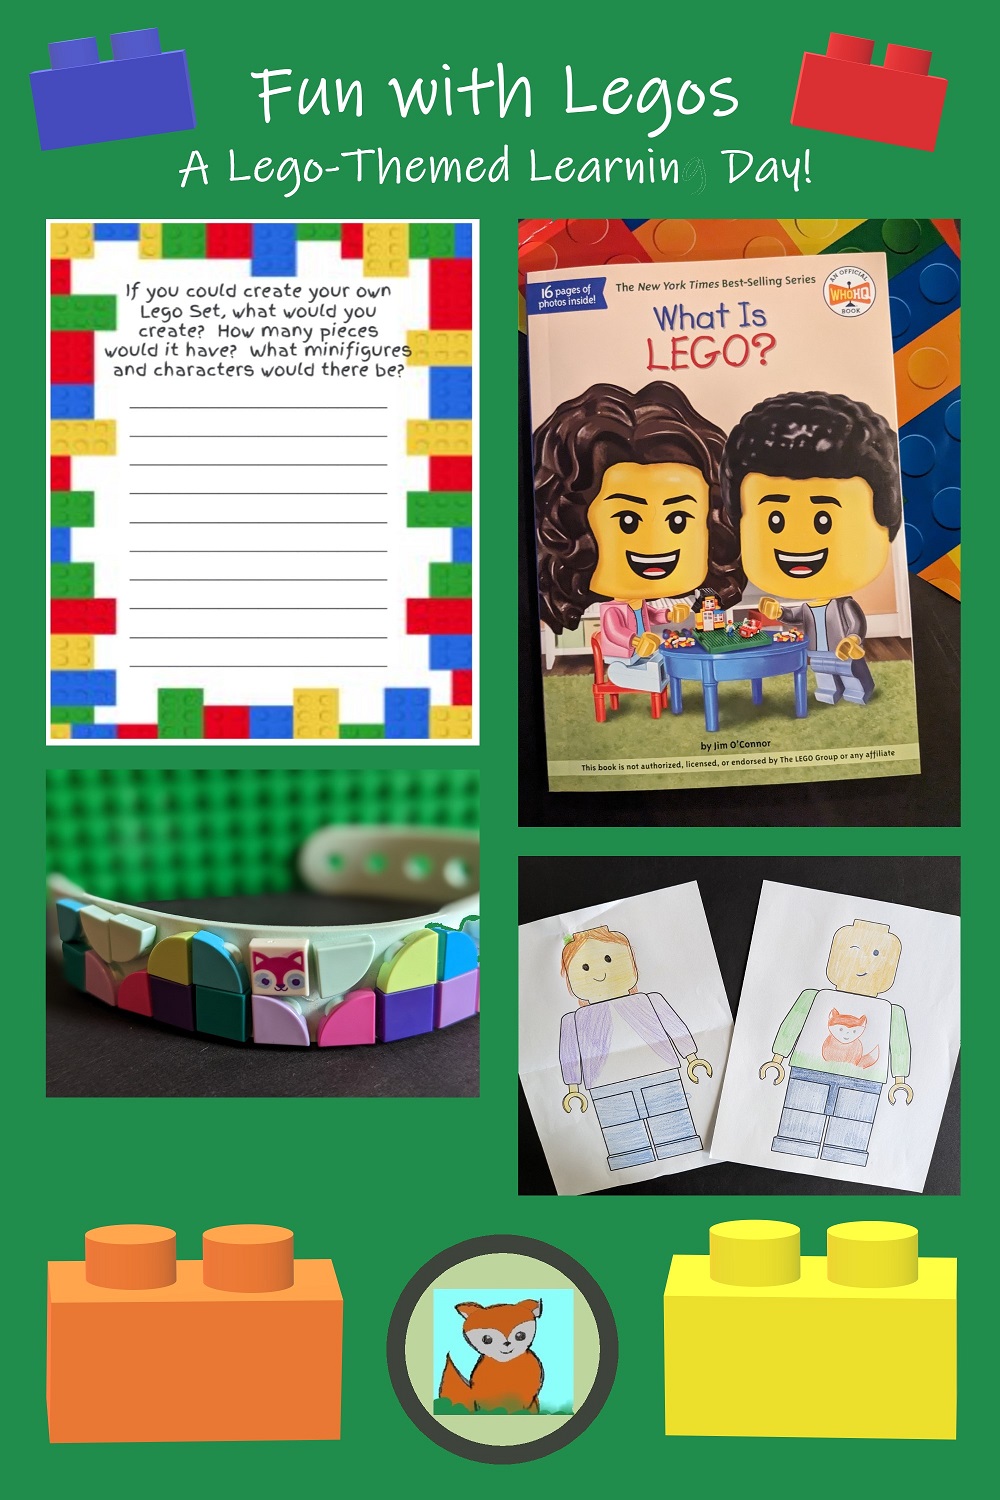 Amazing Fun with Learning – A Day Devoted to Legos